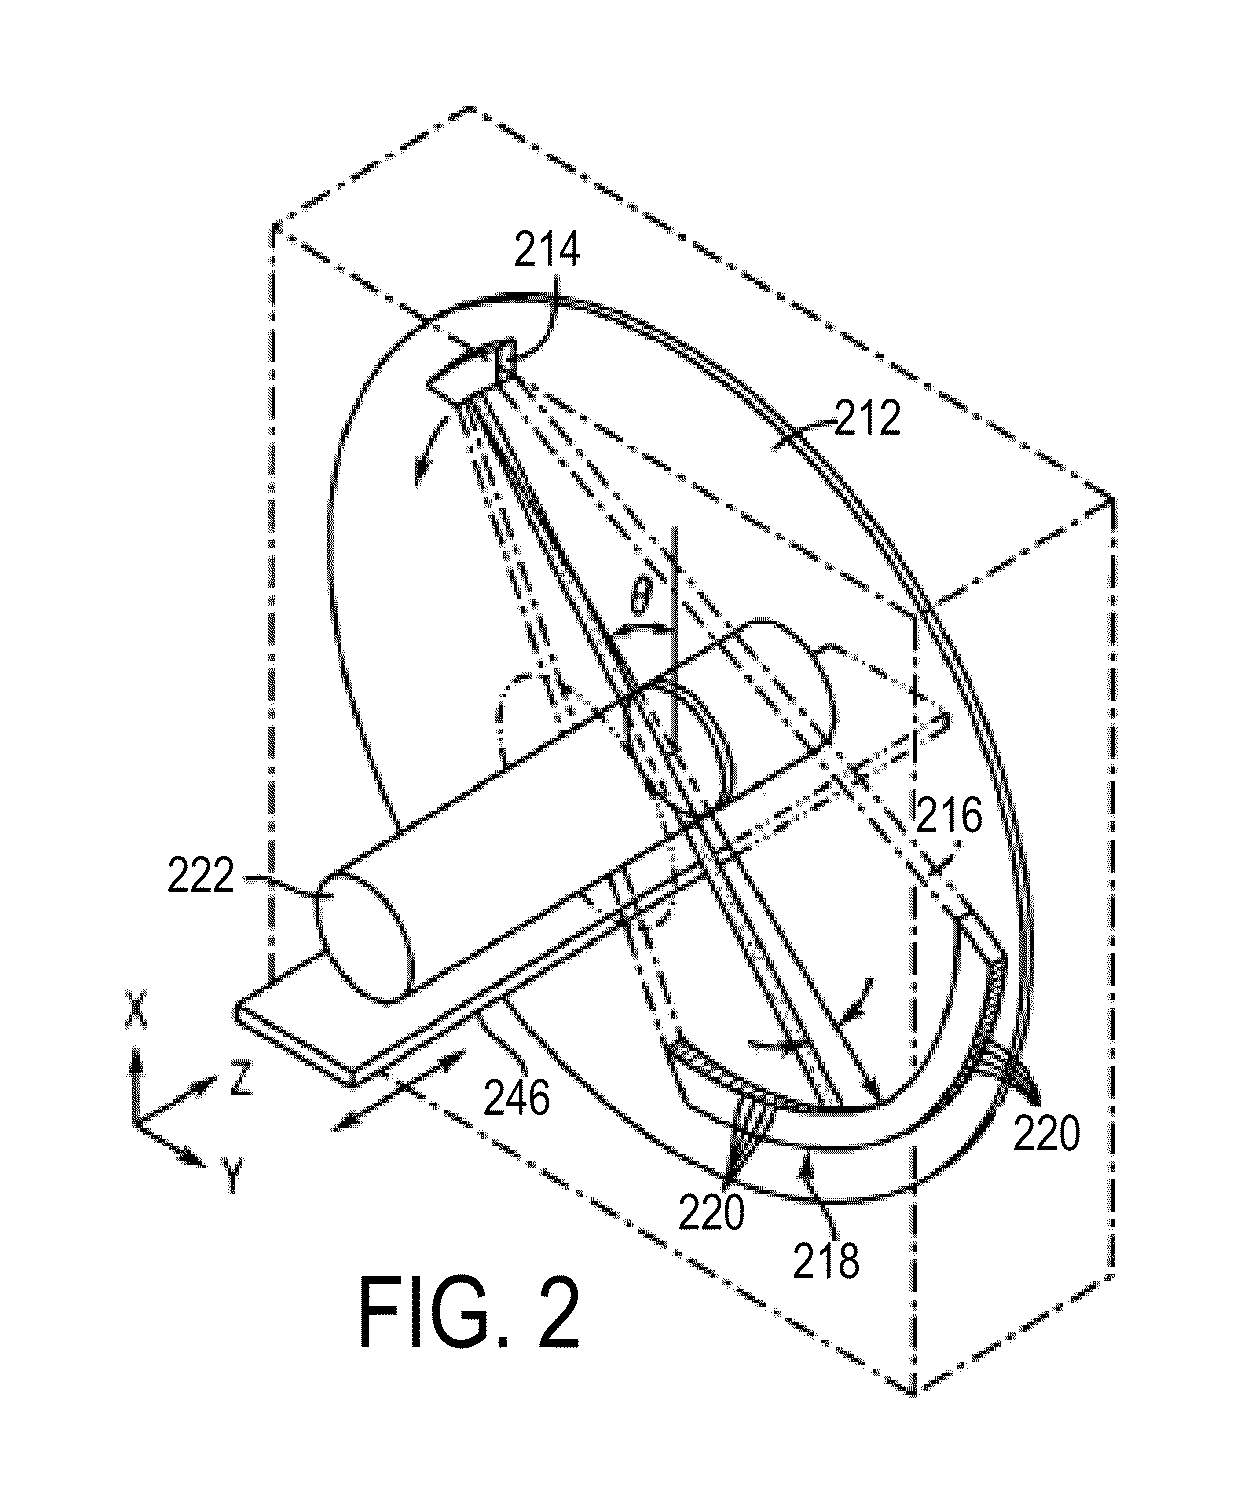 System and Method for Highly Attenuating Material Artifact Reduction in X-Ray Computed Tomography